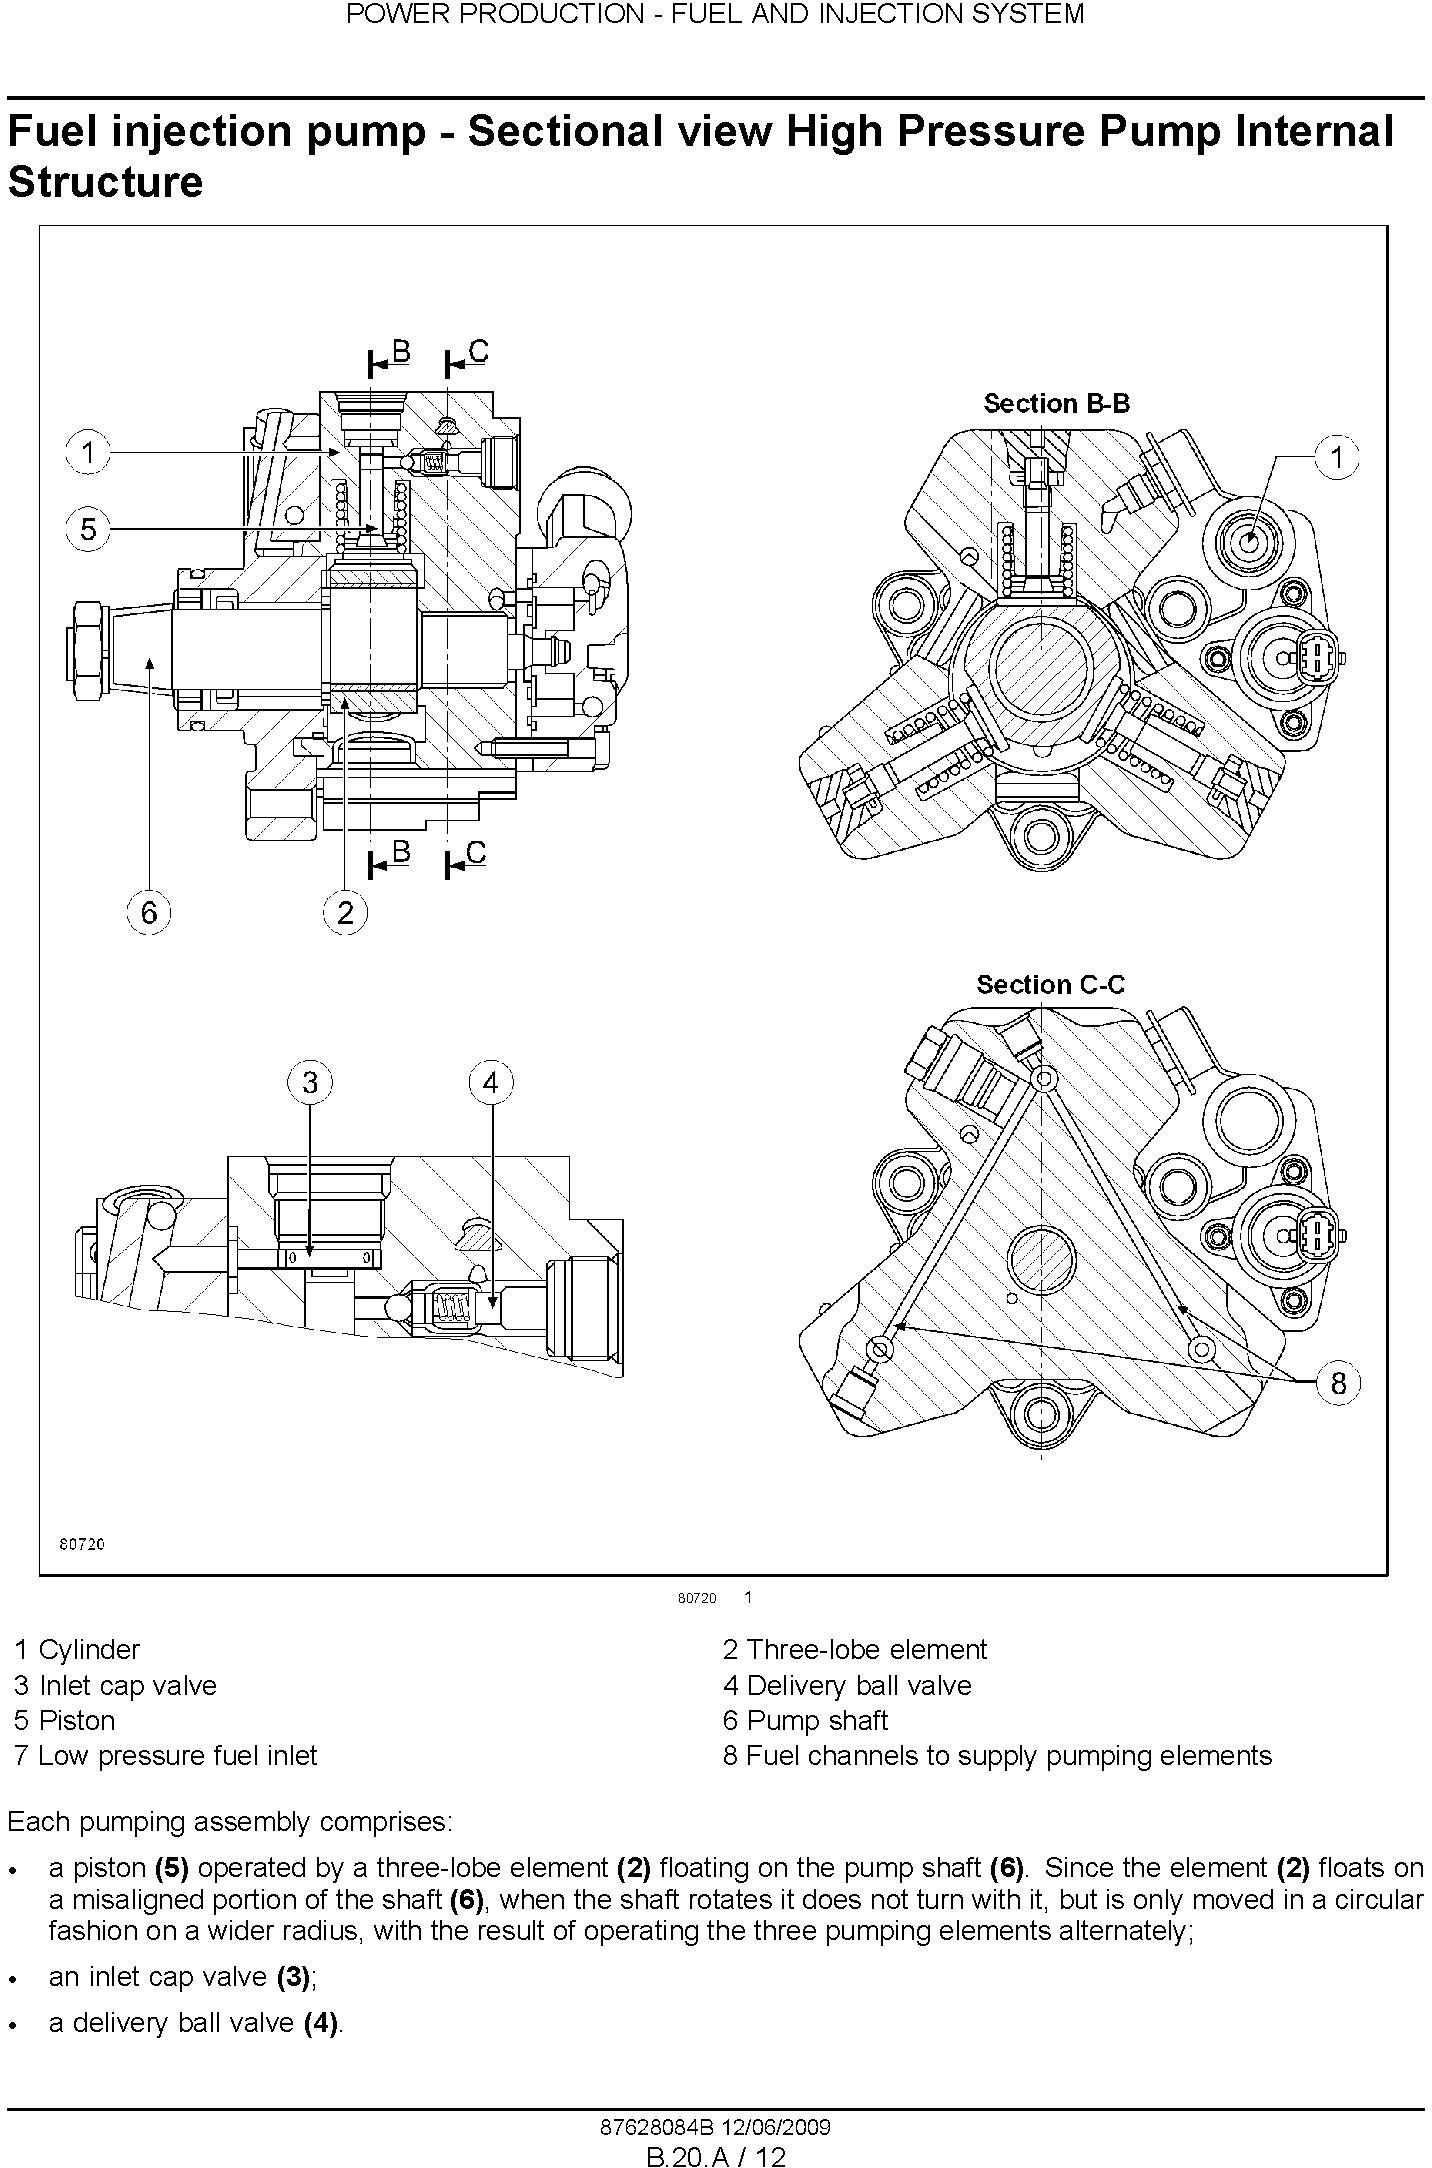 New Holland T7030, T7040, T7050, T7060 Tractor Service Manual - 3